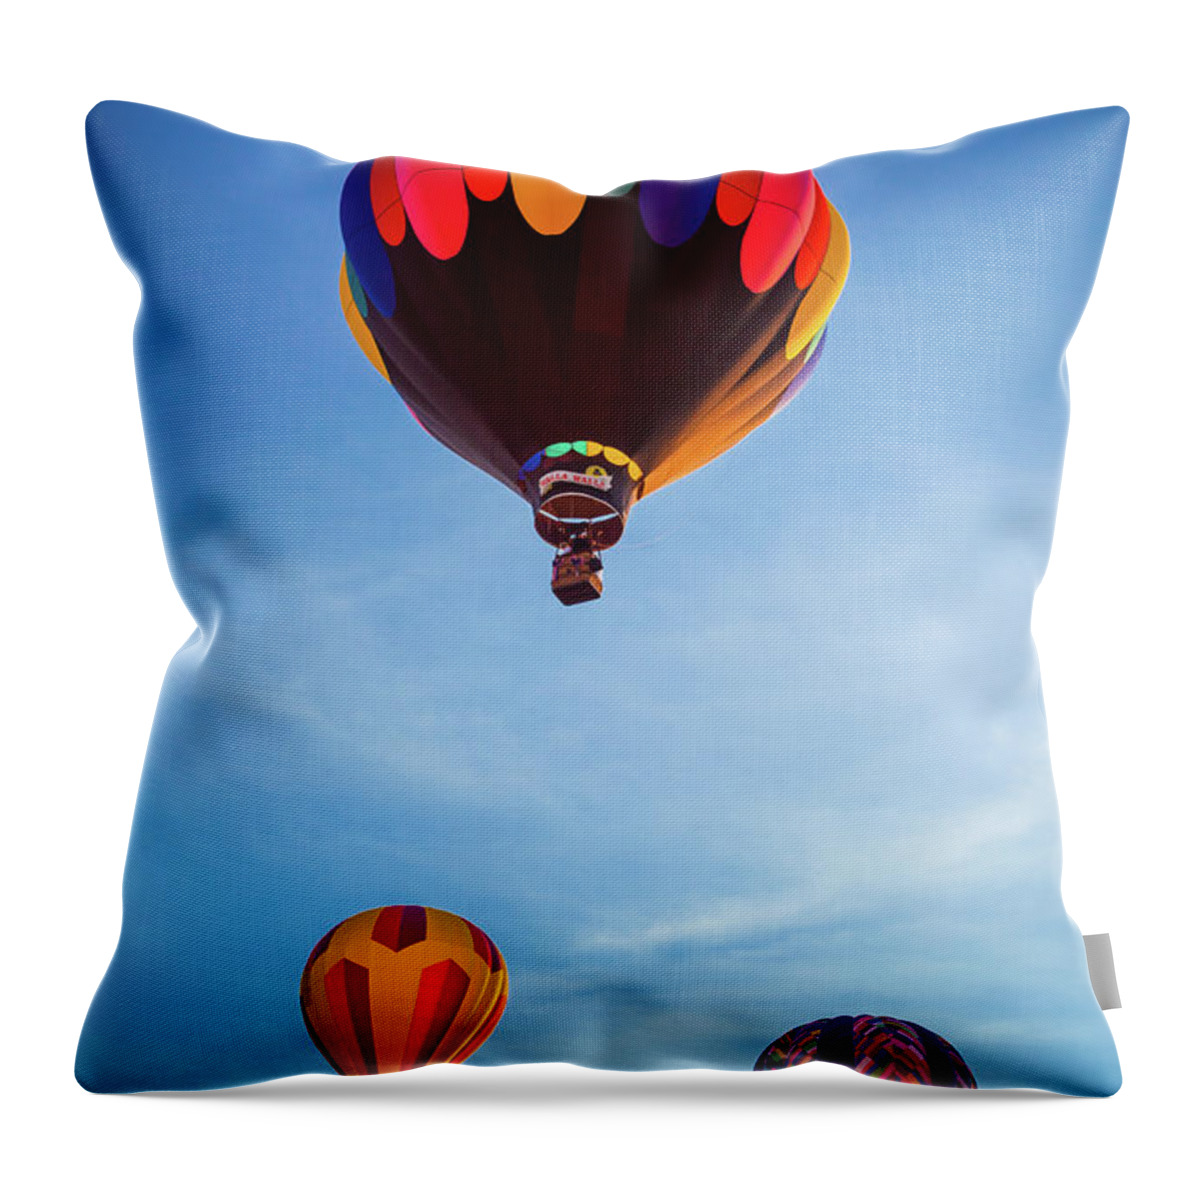 America Throw Pillow featuring the photograph Three Balloons by Inge Johnsson